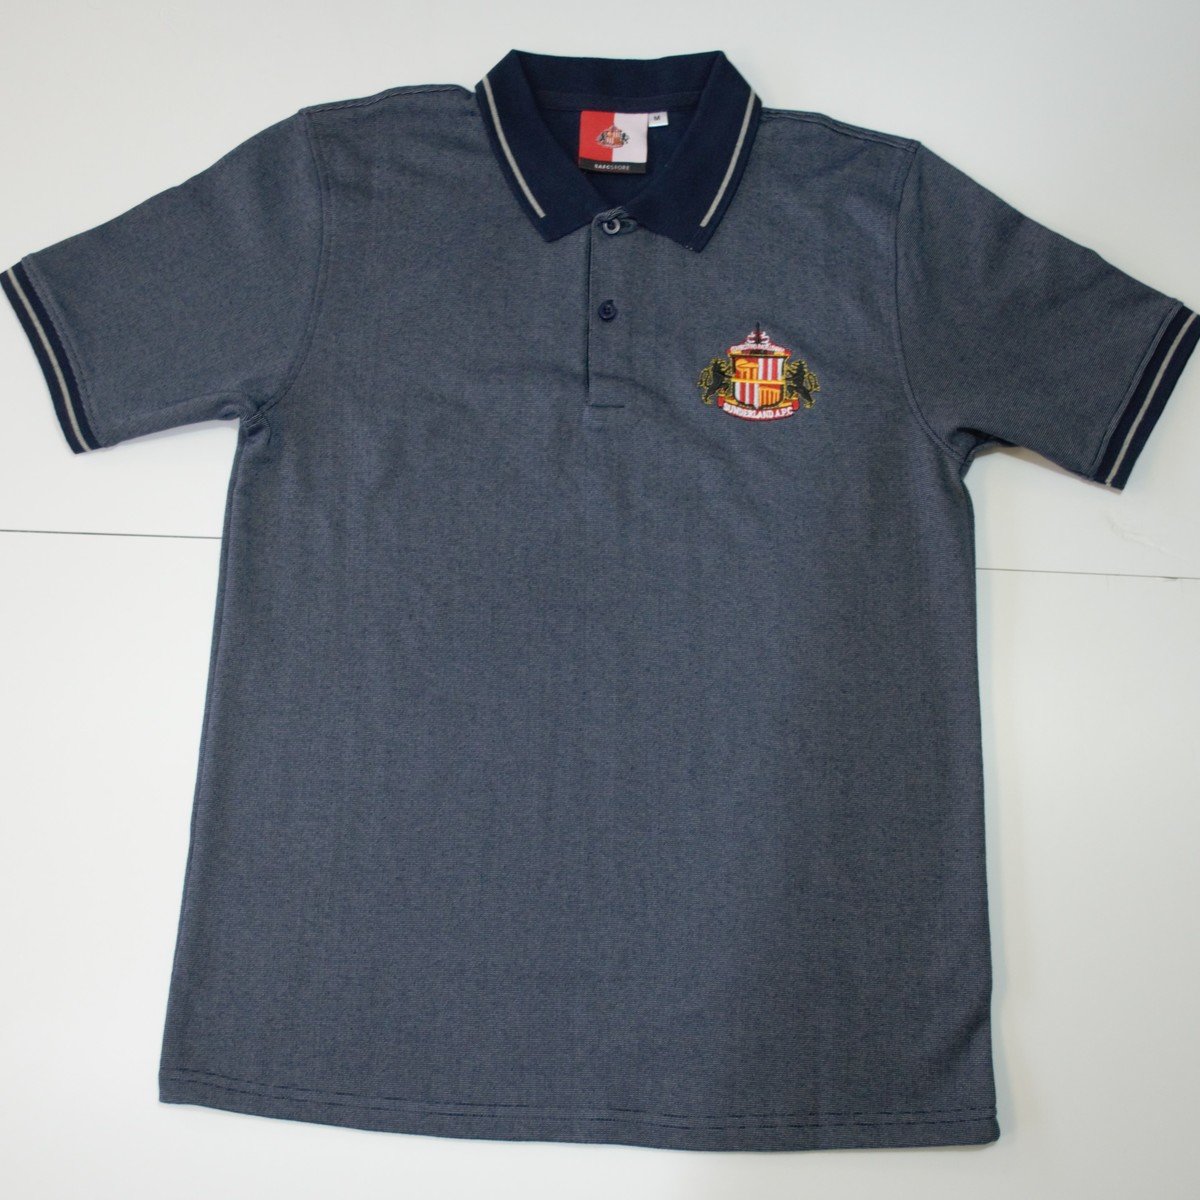 Buy the LINKS POLO online at Sunderland AFC Store